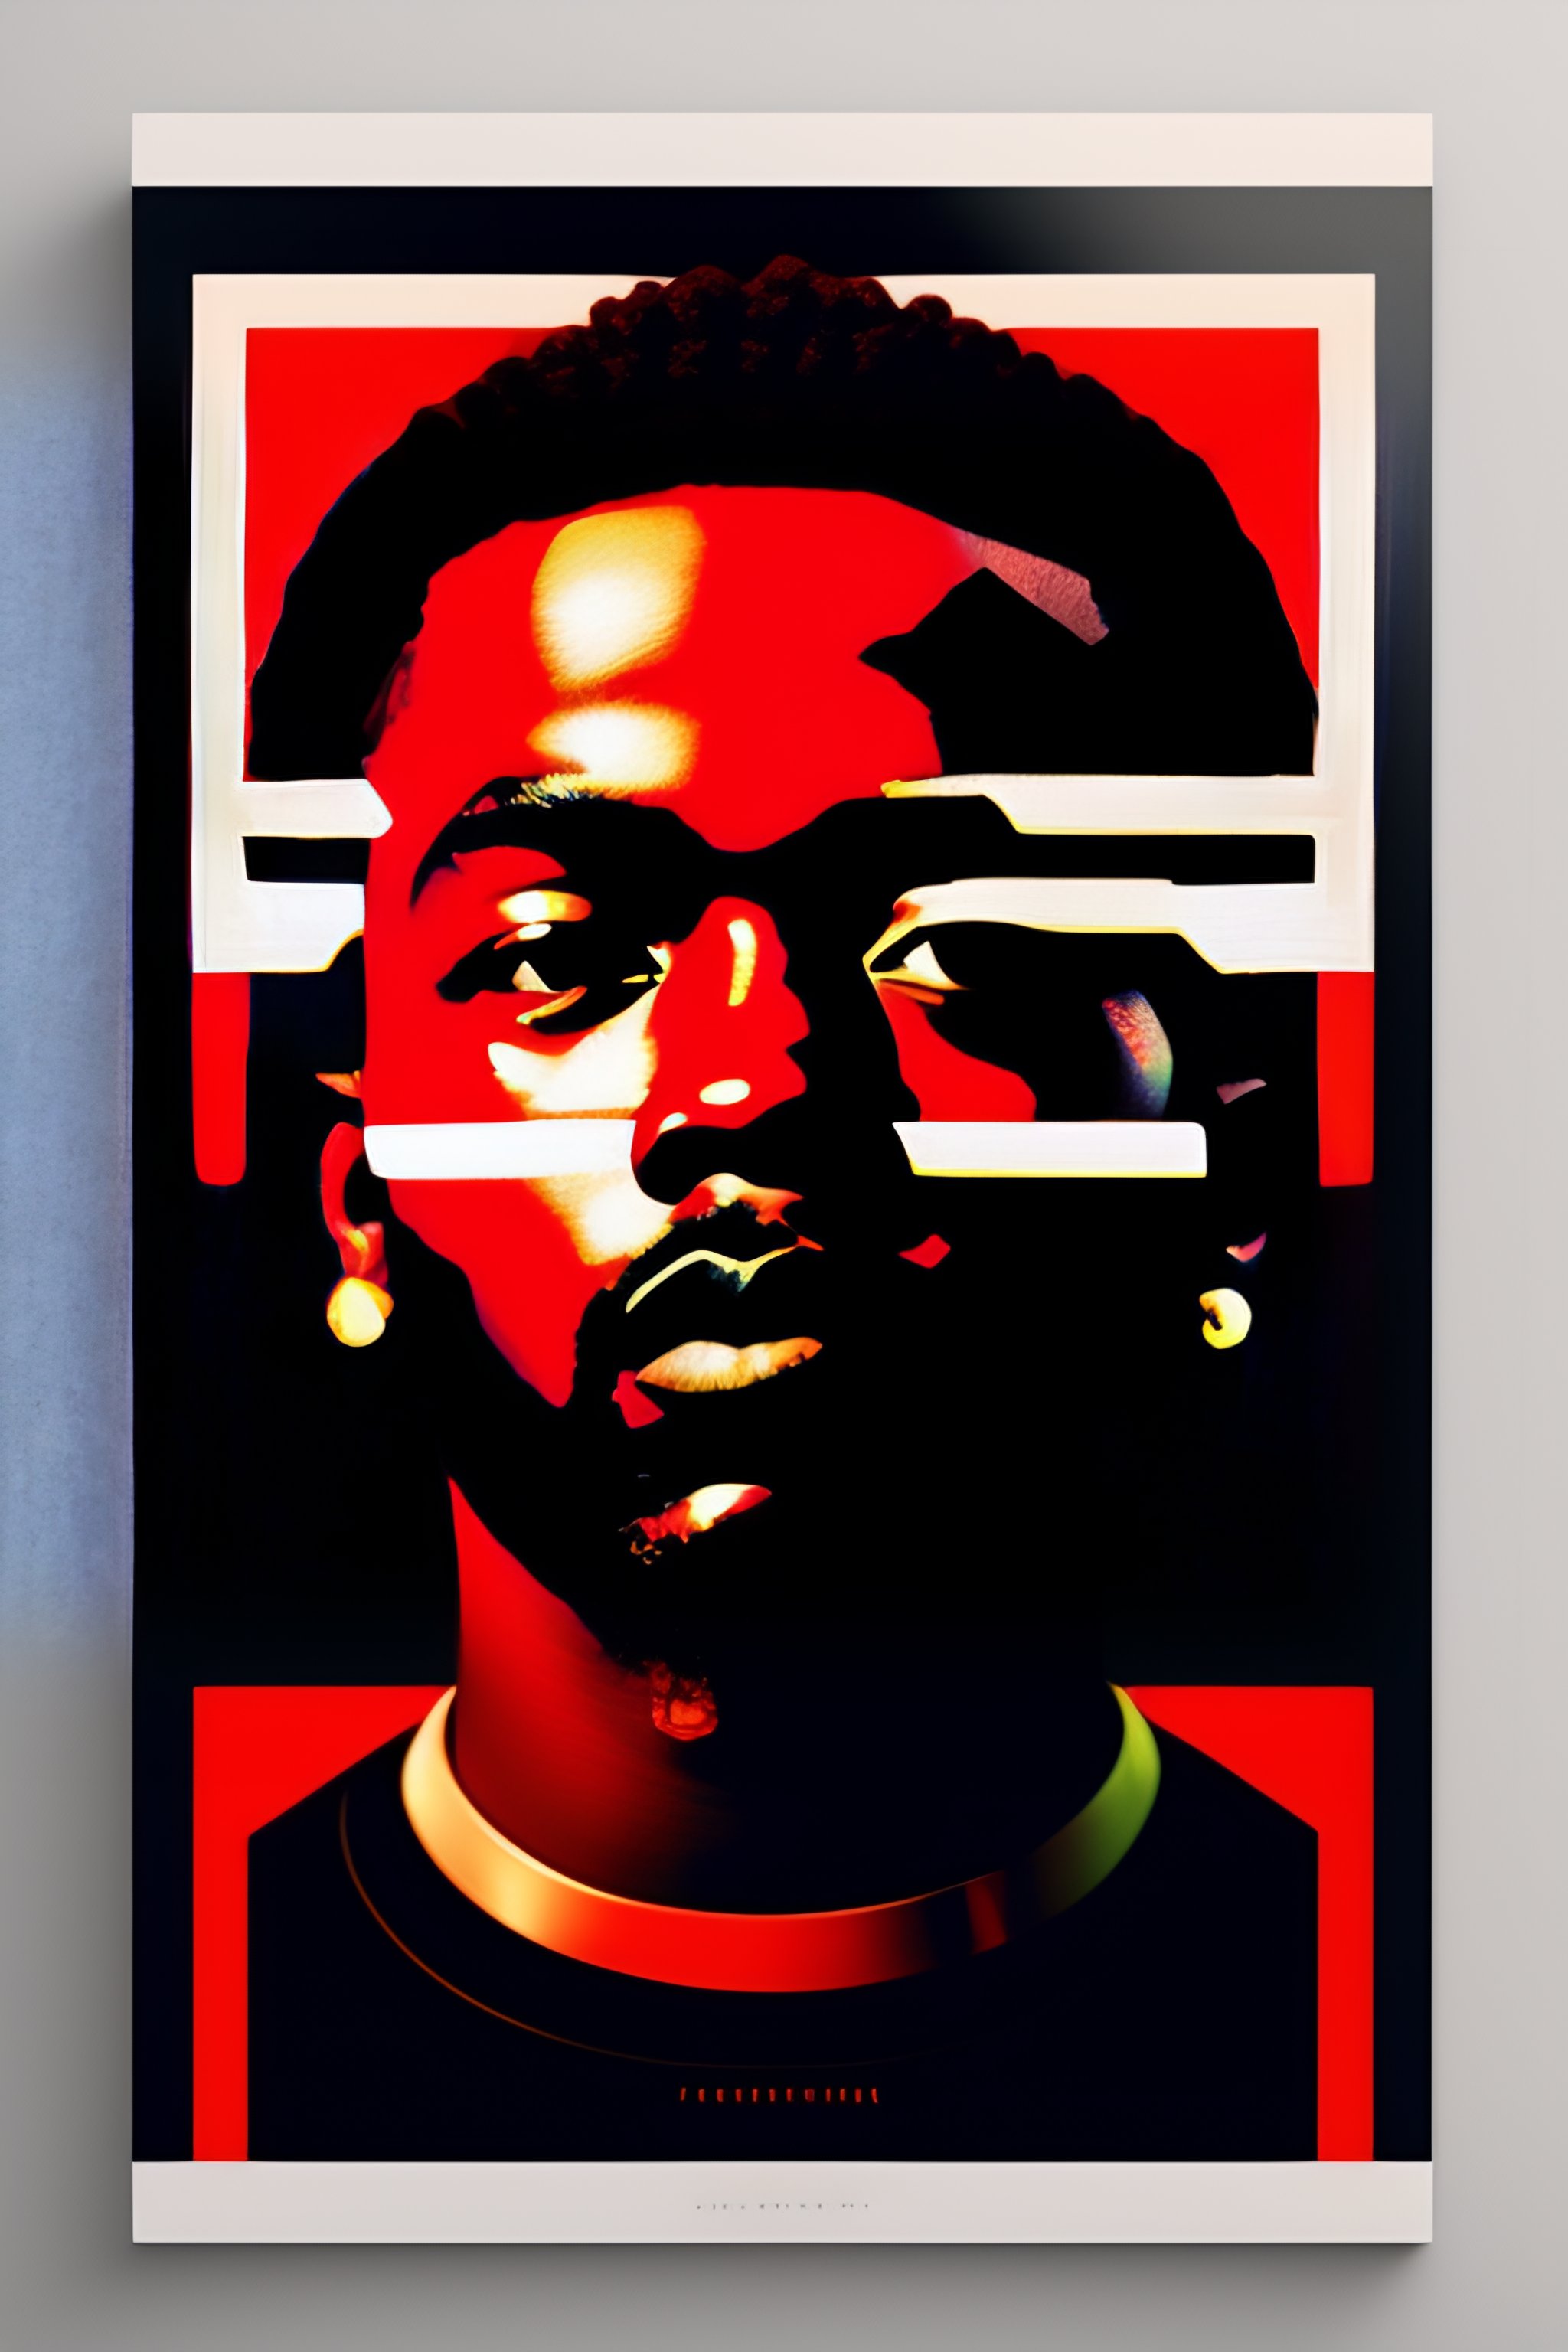 Lexica - Constructivism album cover design for kendrick lamar, in the style  of Virgil Abloh, no words